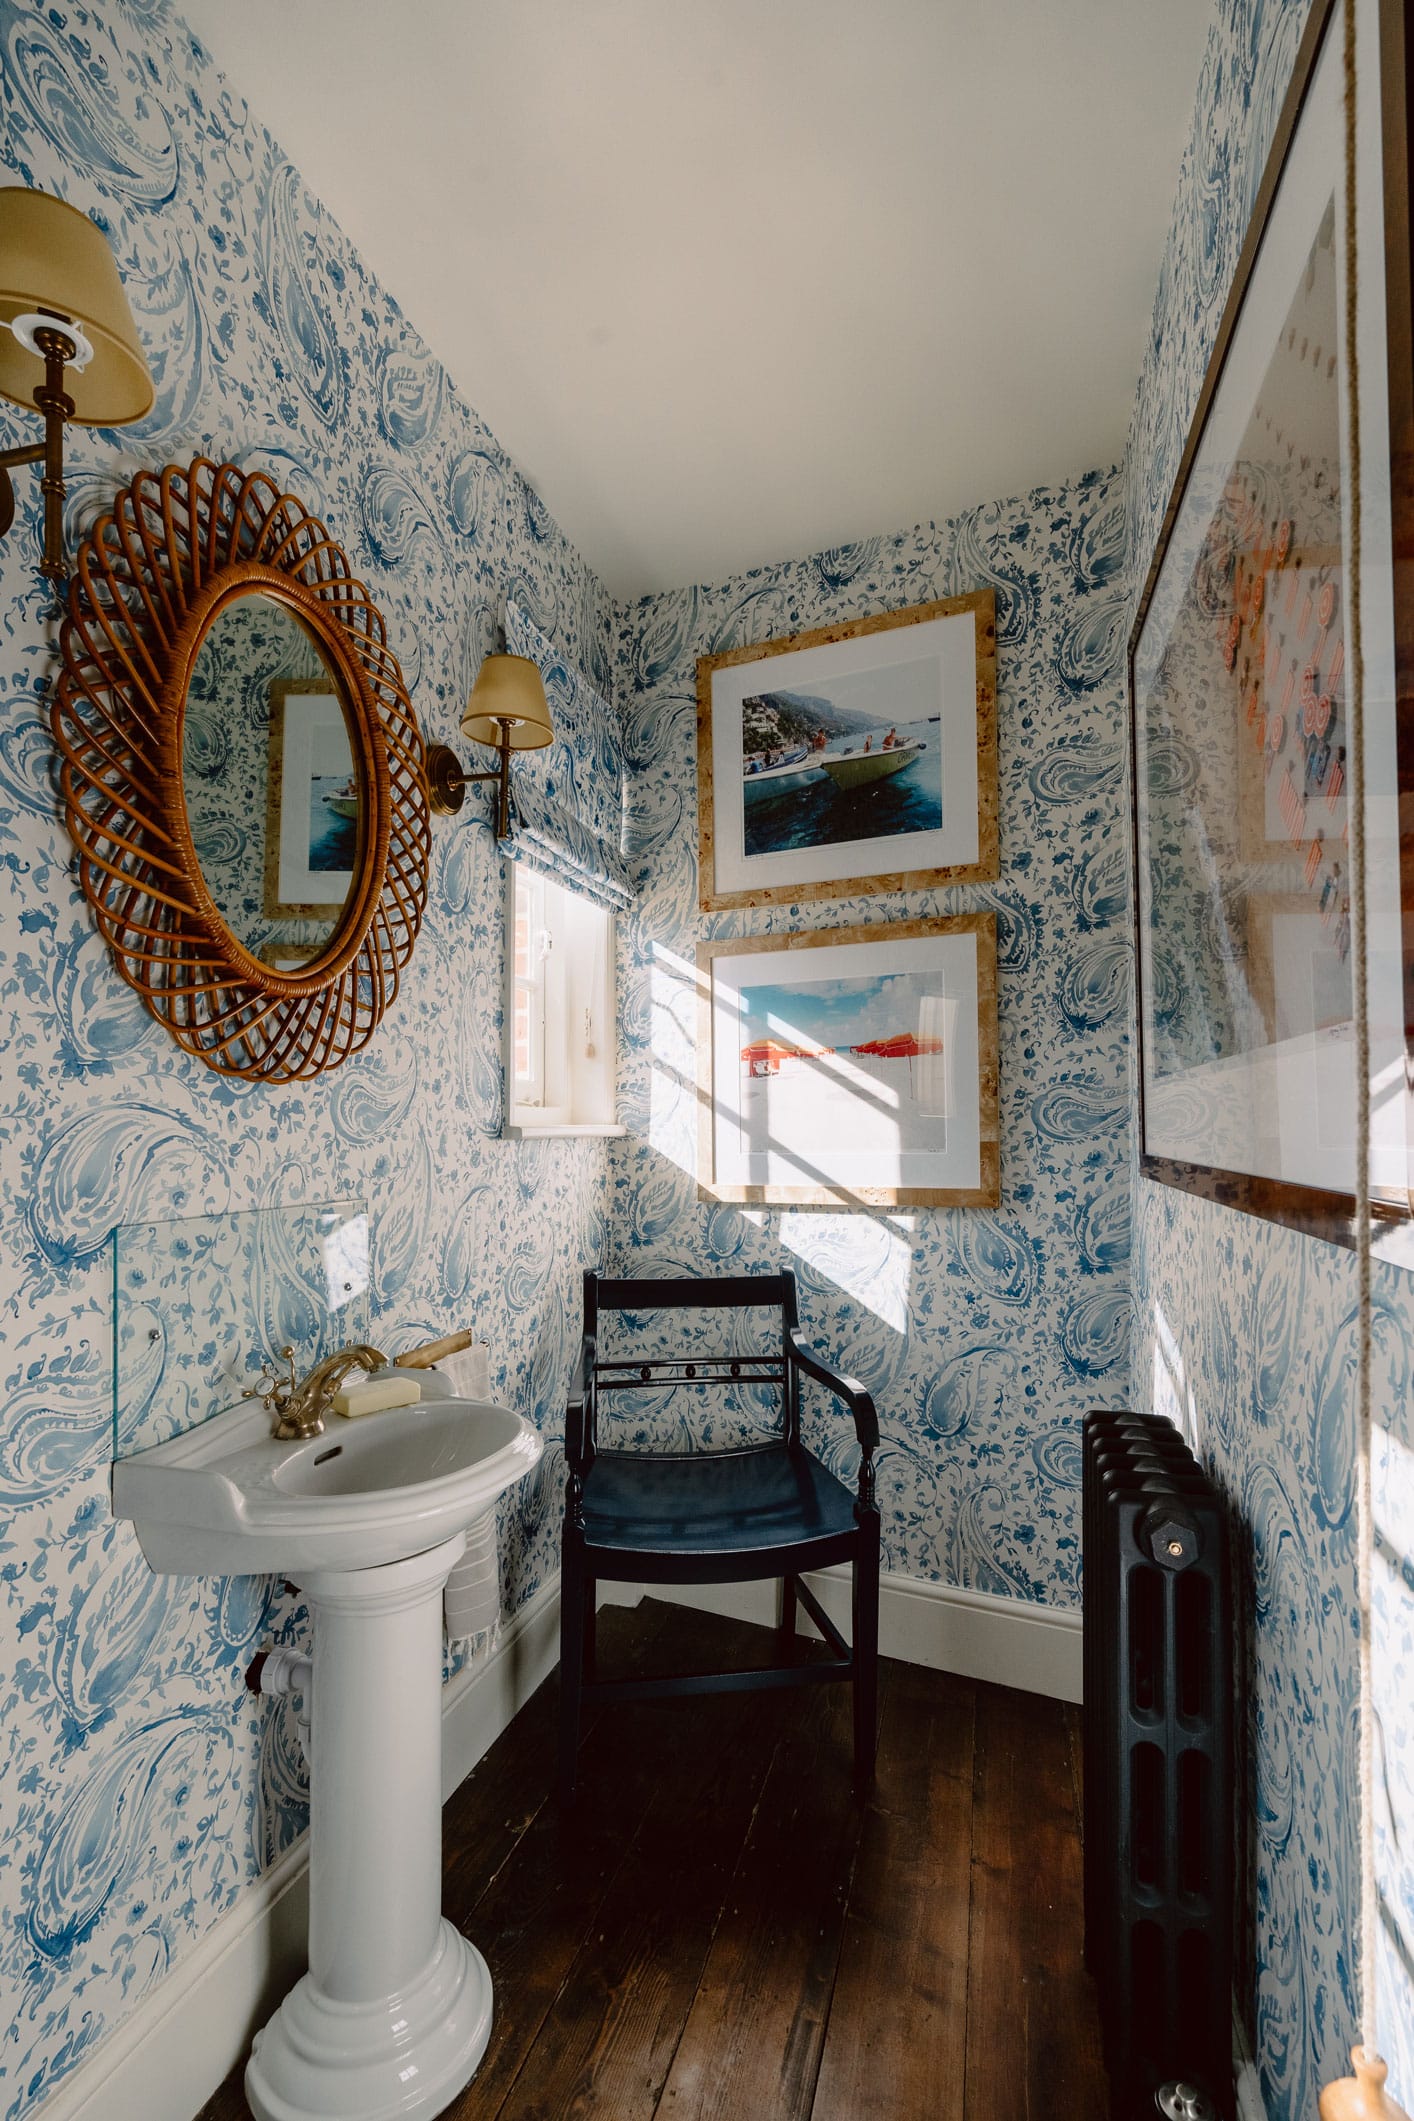 Louise Roe of Front Row talks us through her downstairs loo